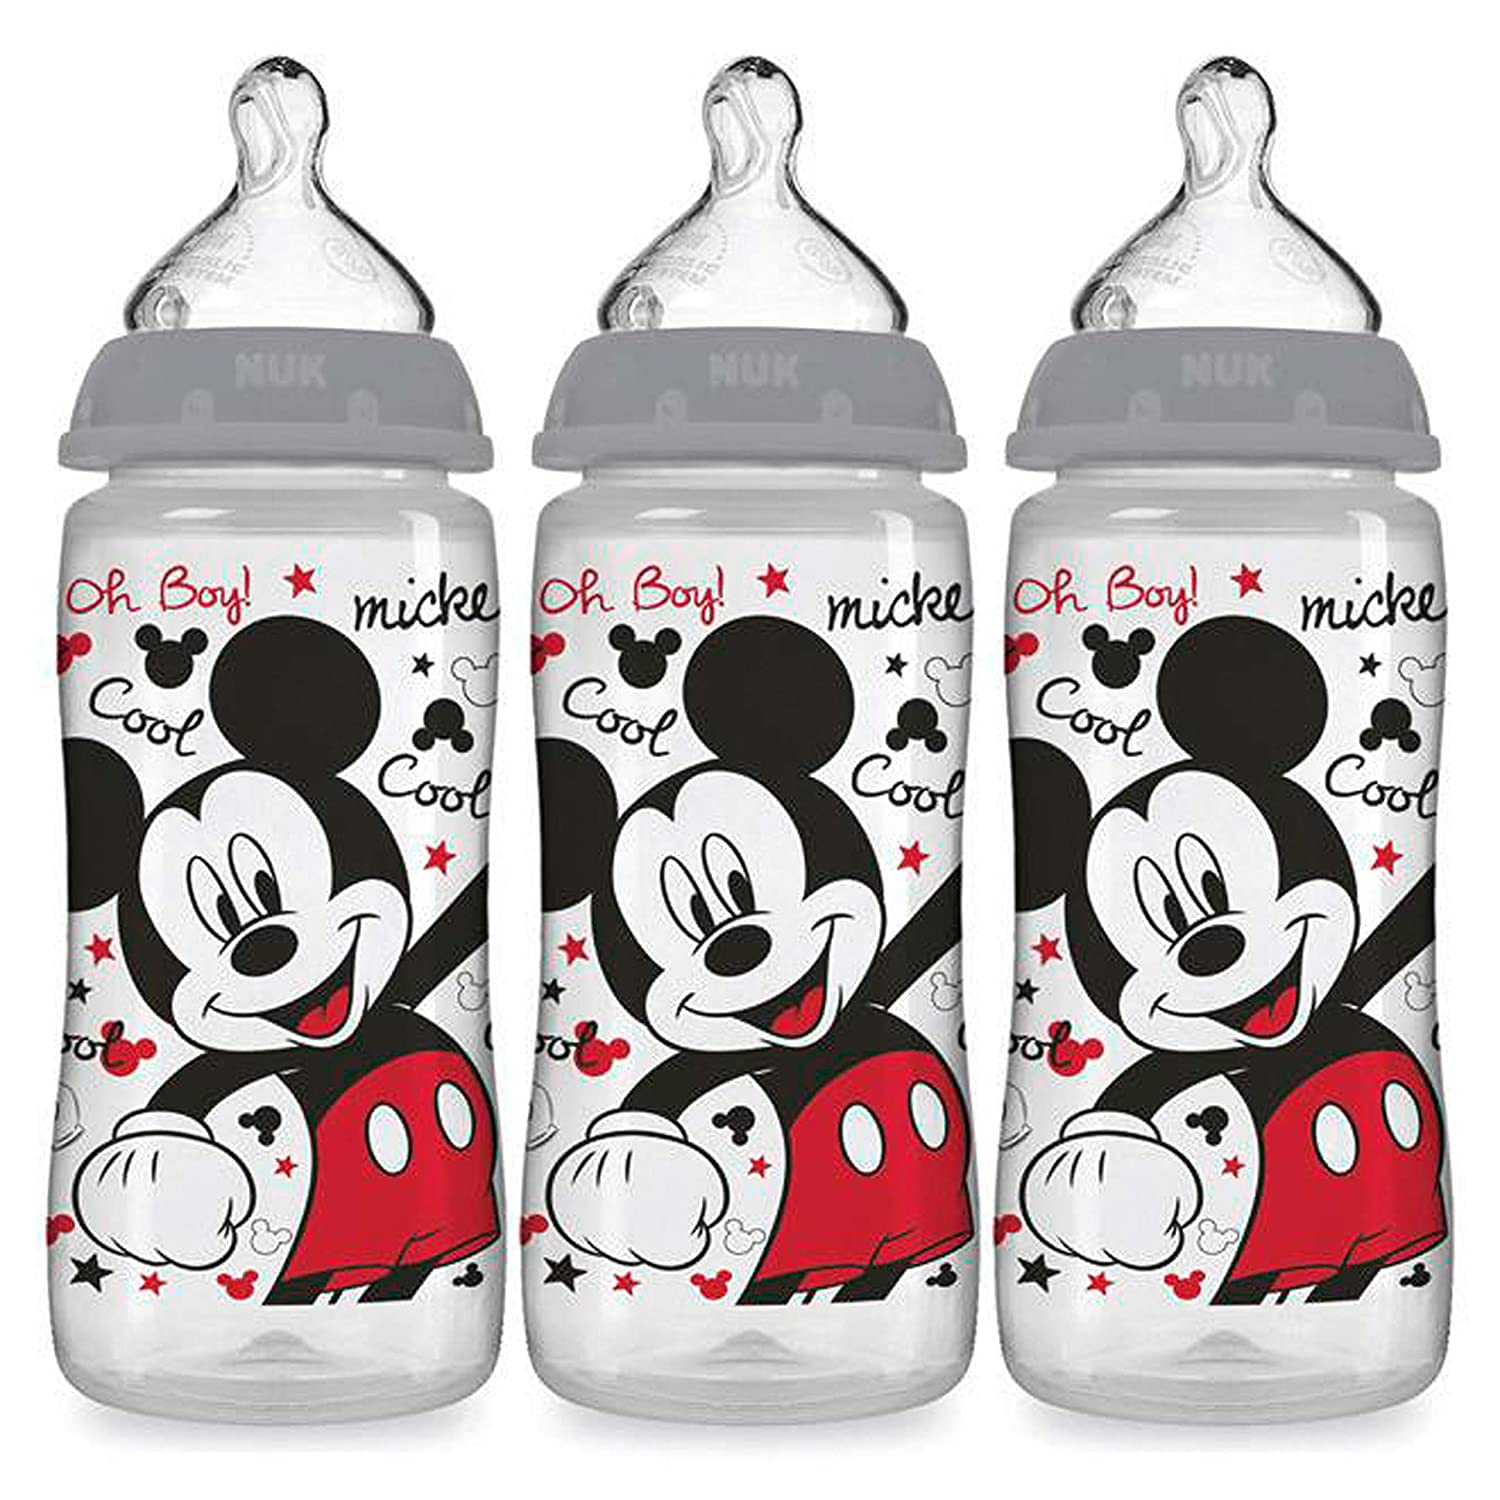 Review of NUK Smooth Flow Disney Bottle, Mickey Mouse, 10 Oz, 3 Pack